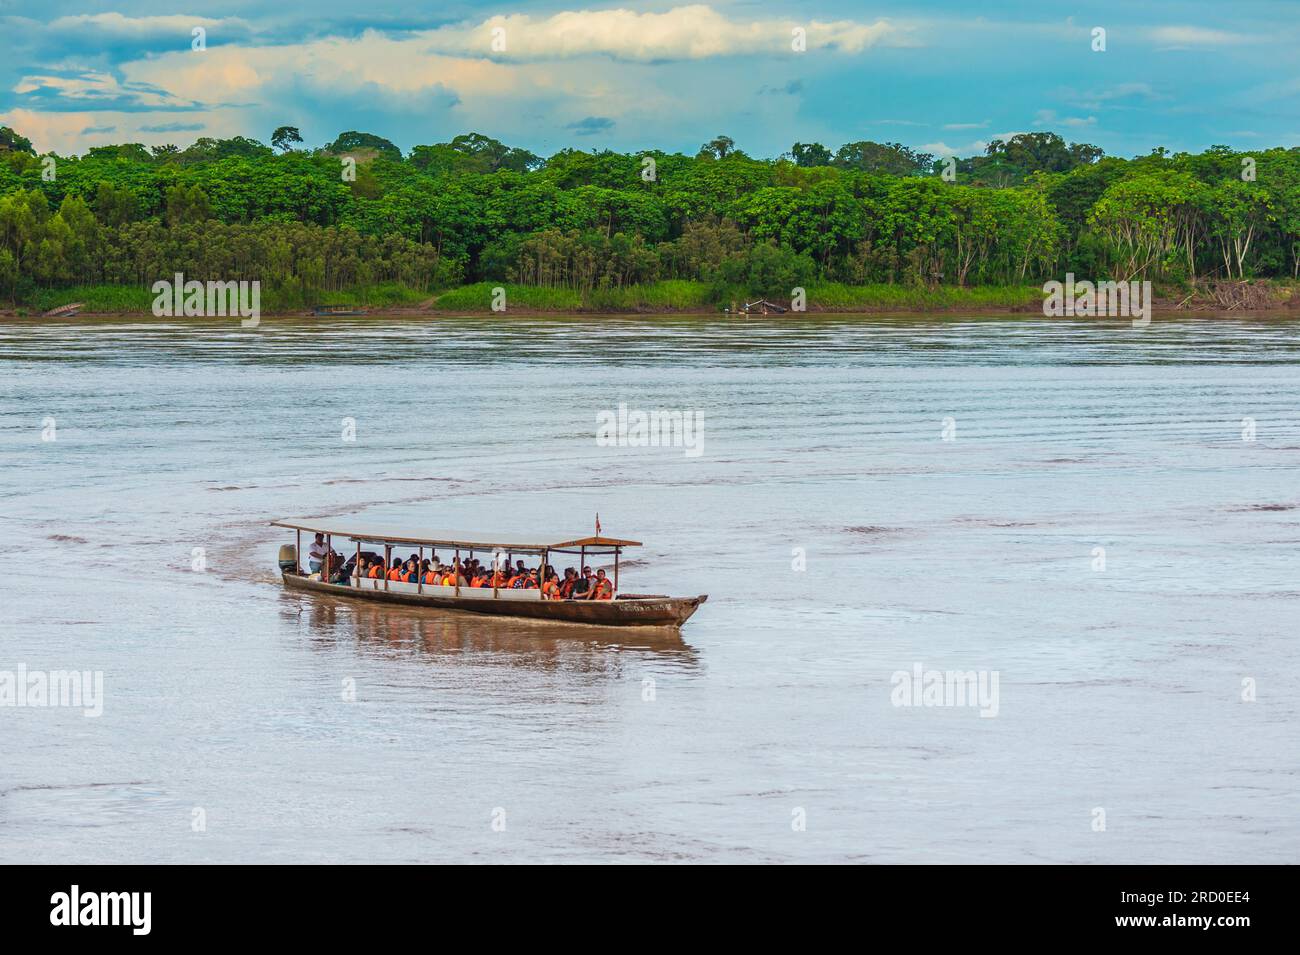 Tourists boat on Madre de Dios River in Peru. Stock Photo